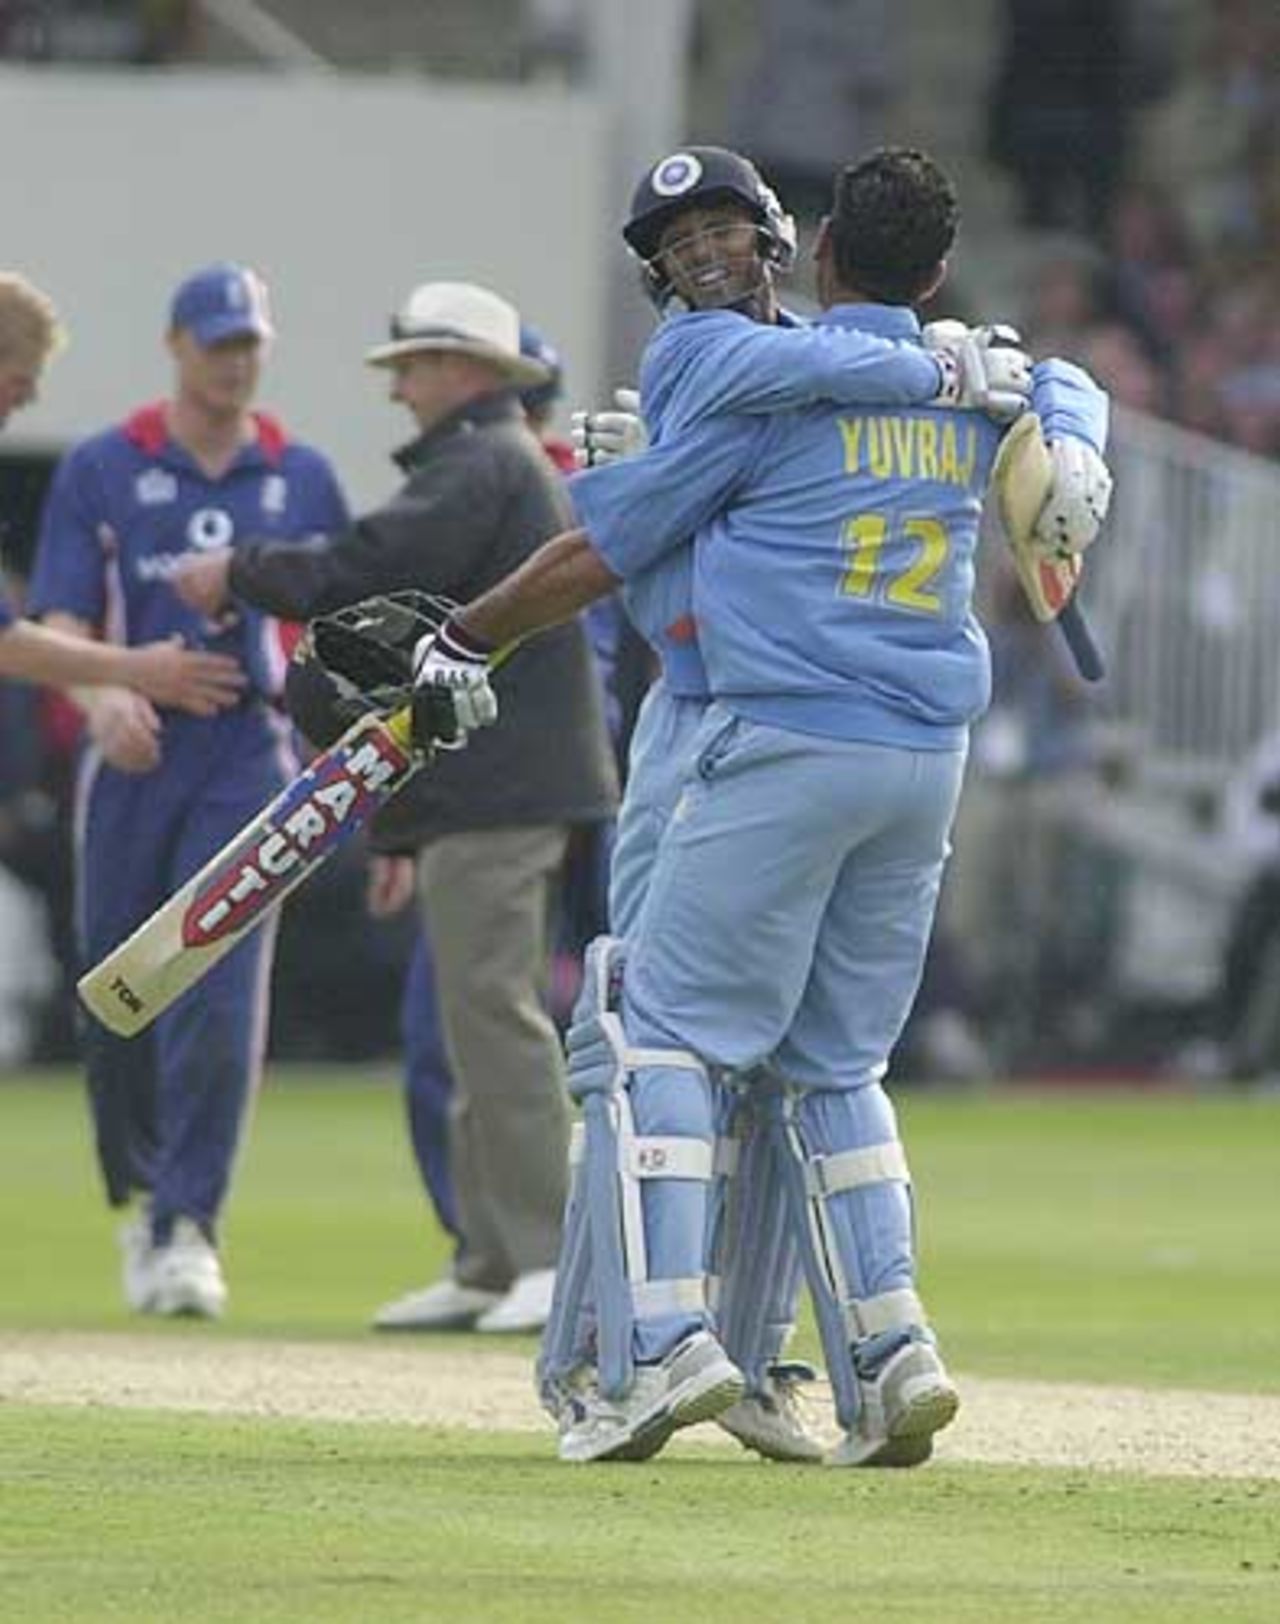 Dravid and Yuvraj Singh , winners at the death, England v India, NatWest Series, Lord's, Sat 29 Jun